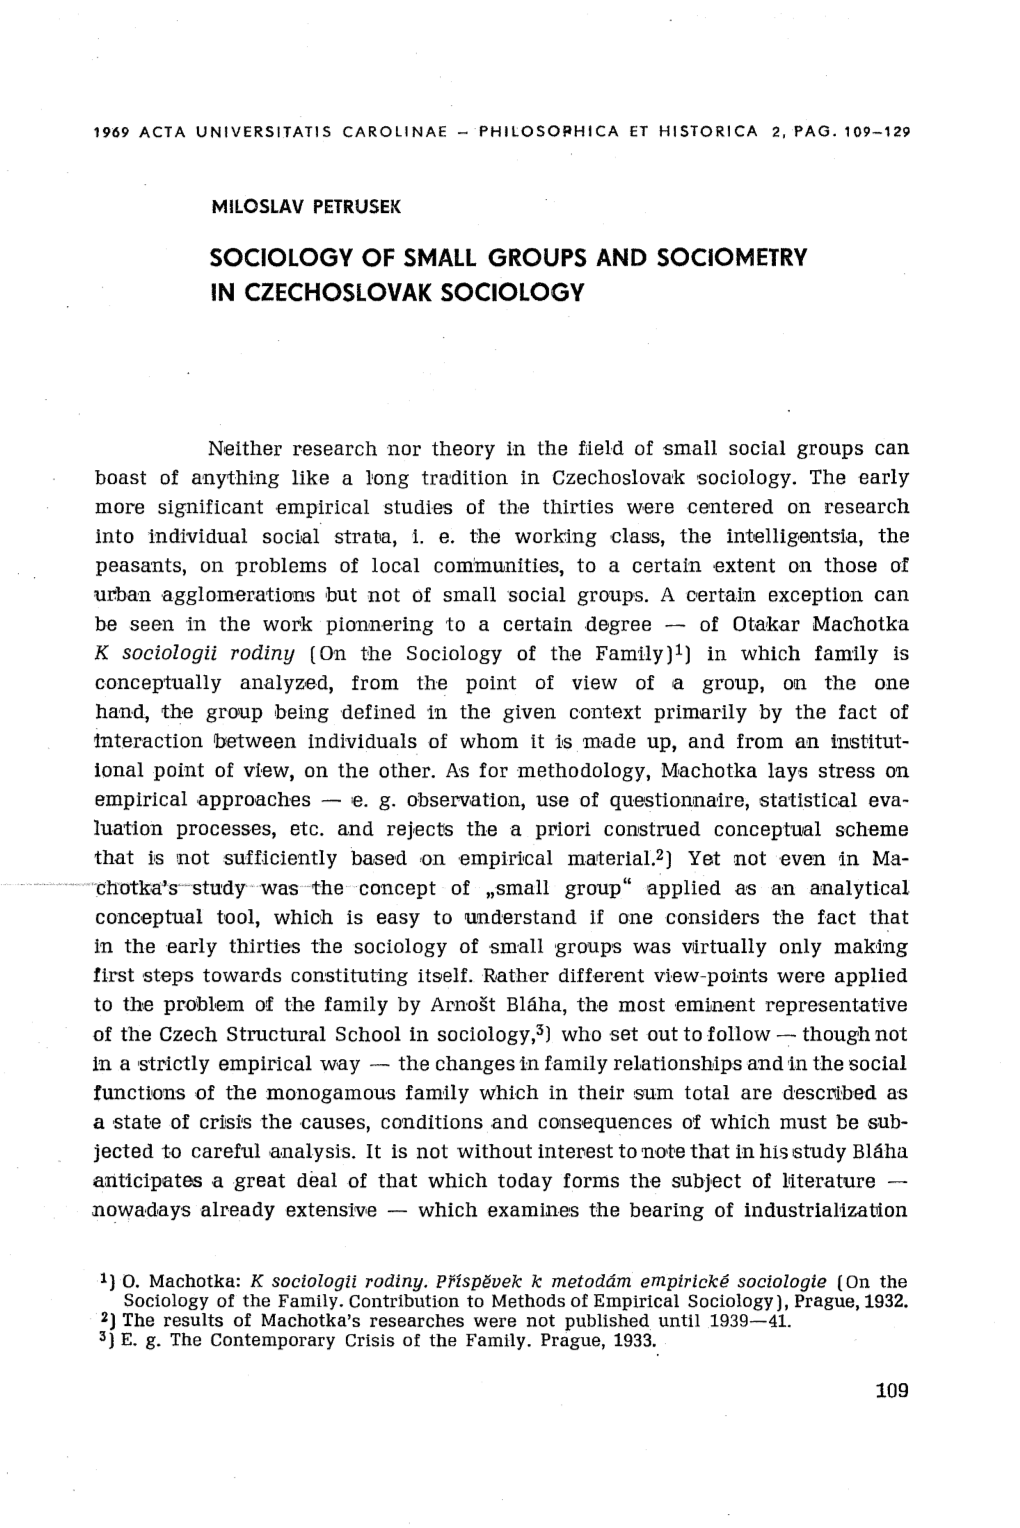 Sociology of Small Groups and Sociometry in Czechoslovak Sociology